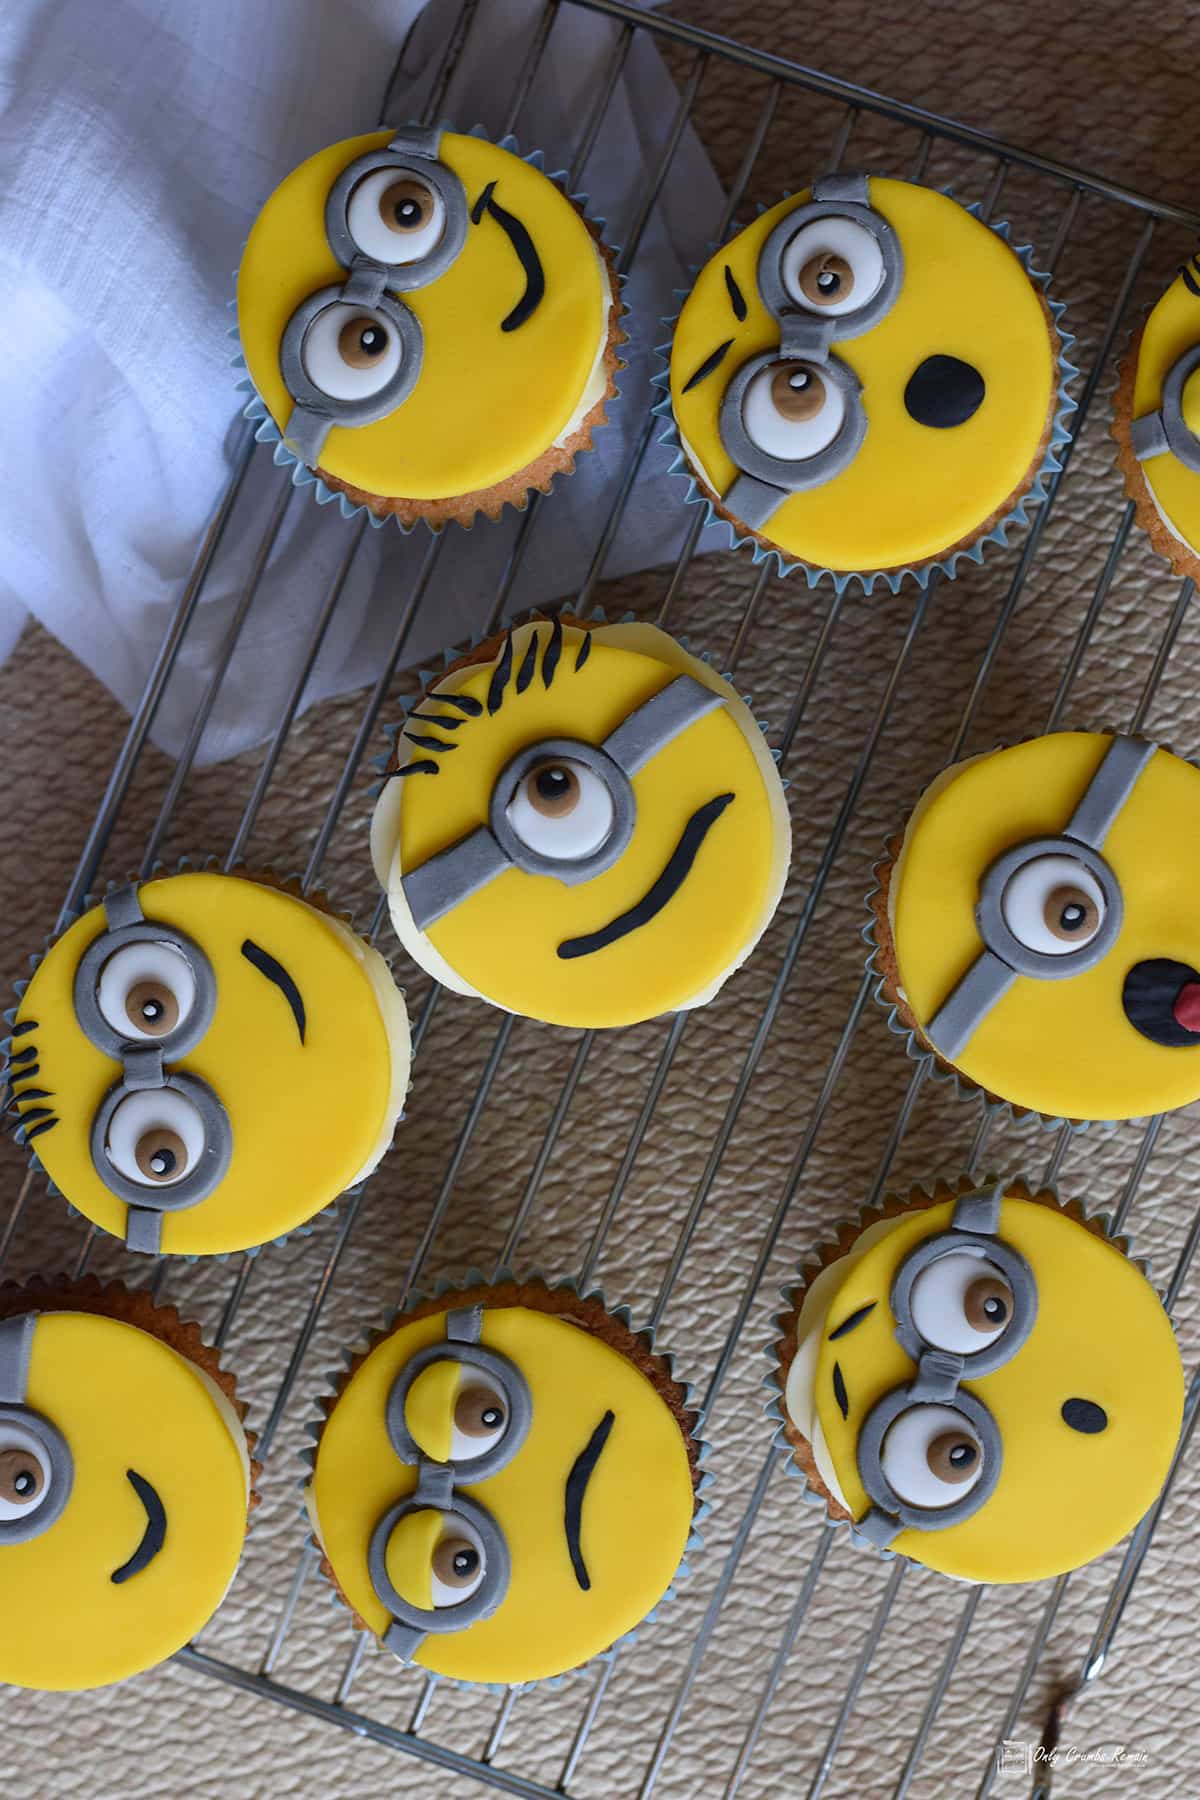 12 MINION CUP CAKE TOPPERS-CUPCAKE PICK TOPPER-MINIONS CAKE PICKS-BIRTHDAY PARTY 